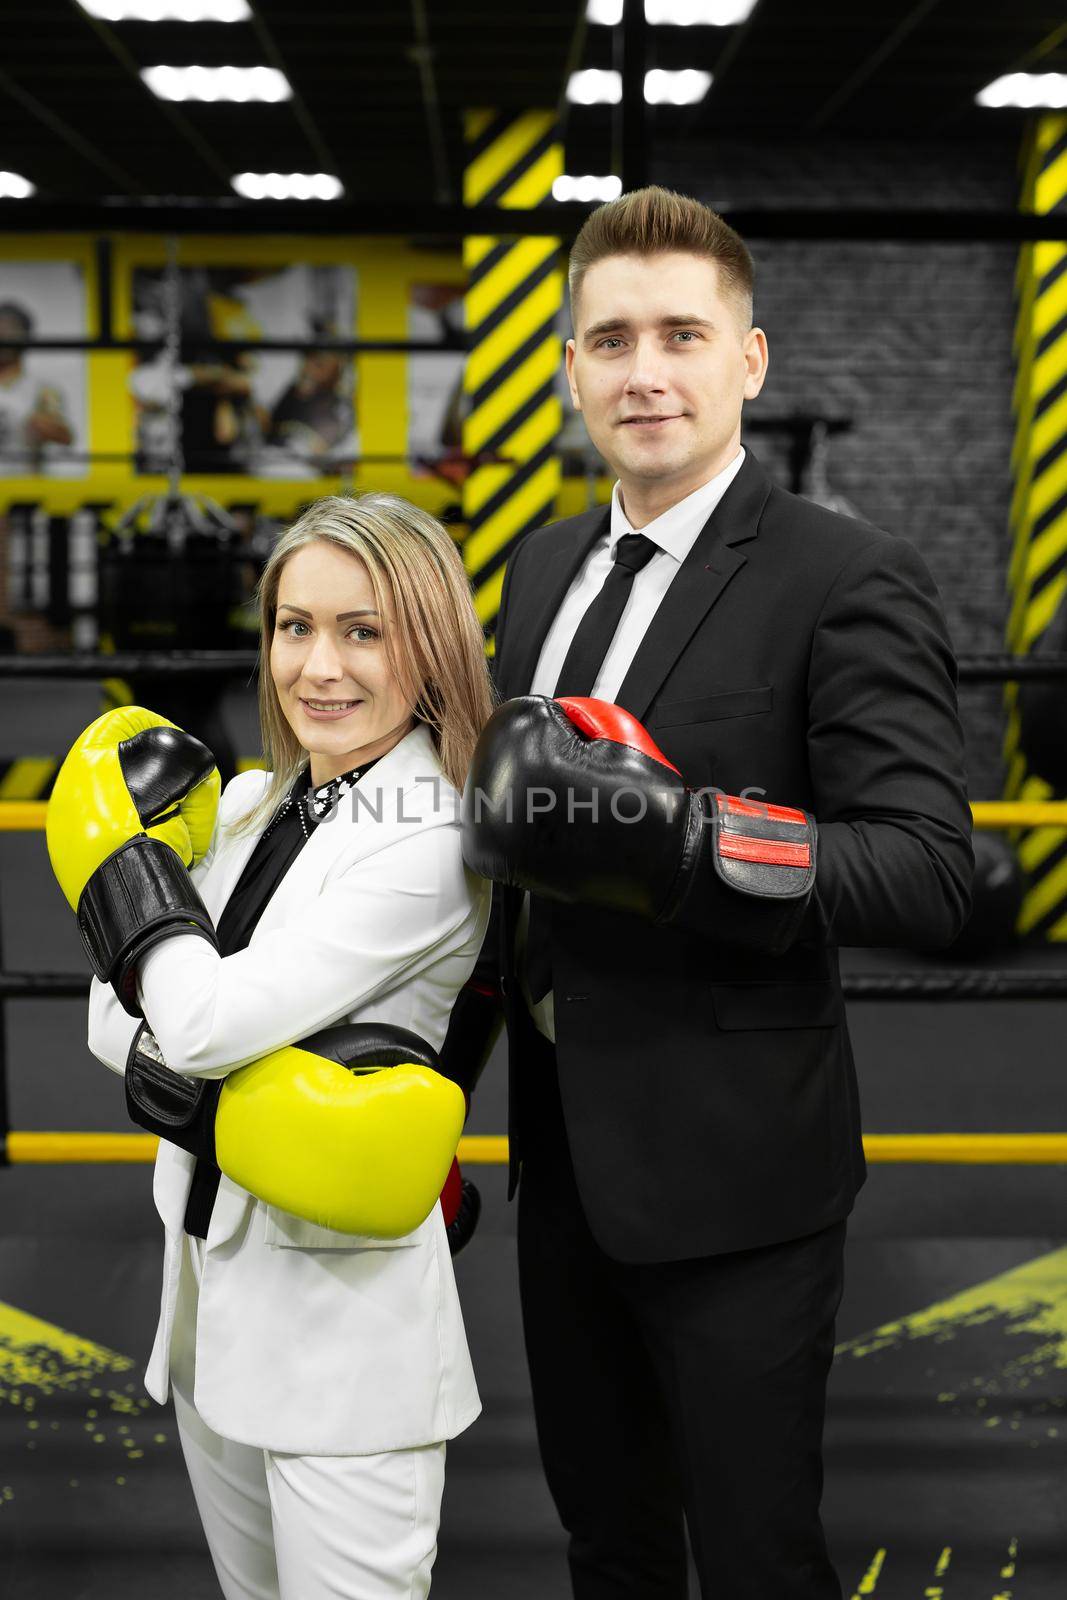 Colleagues, a man and a woman in business suits and boxing gloves in the ring.